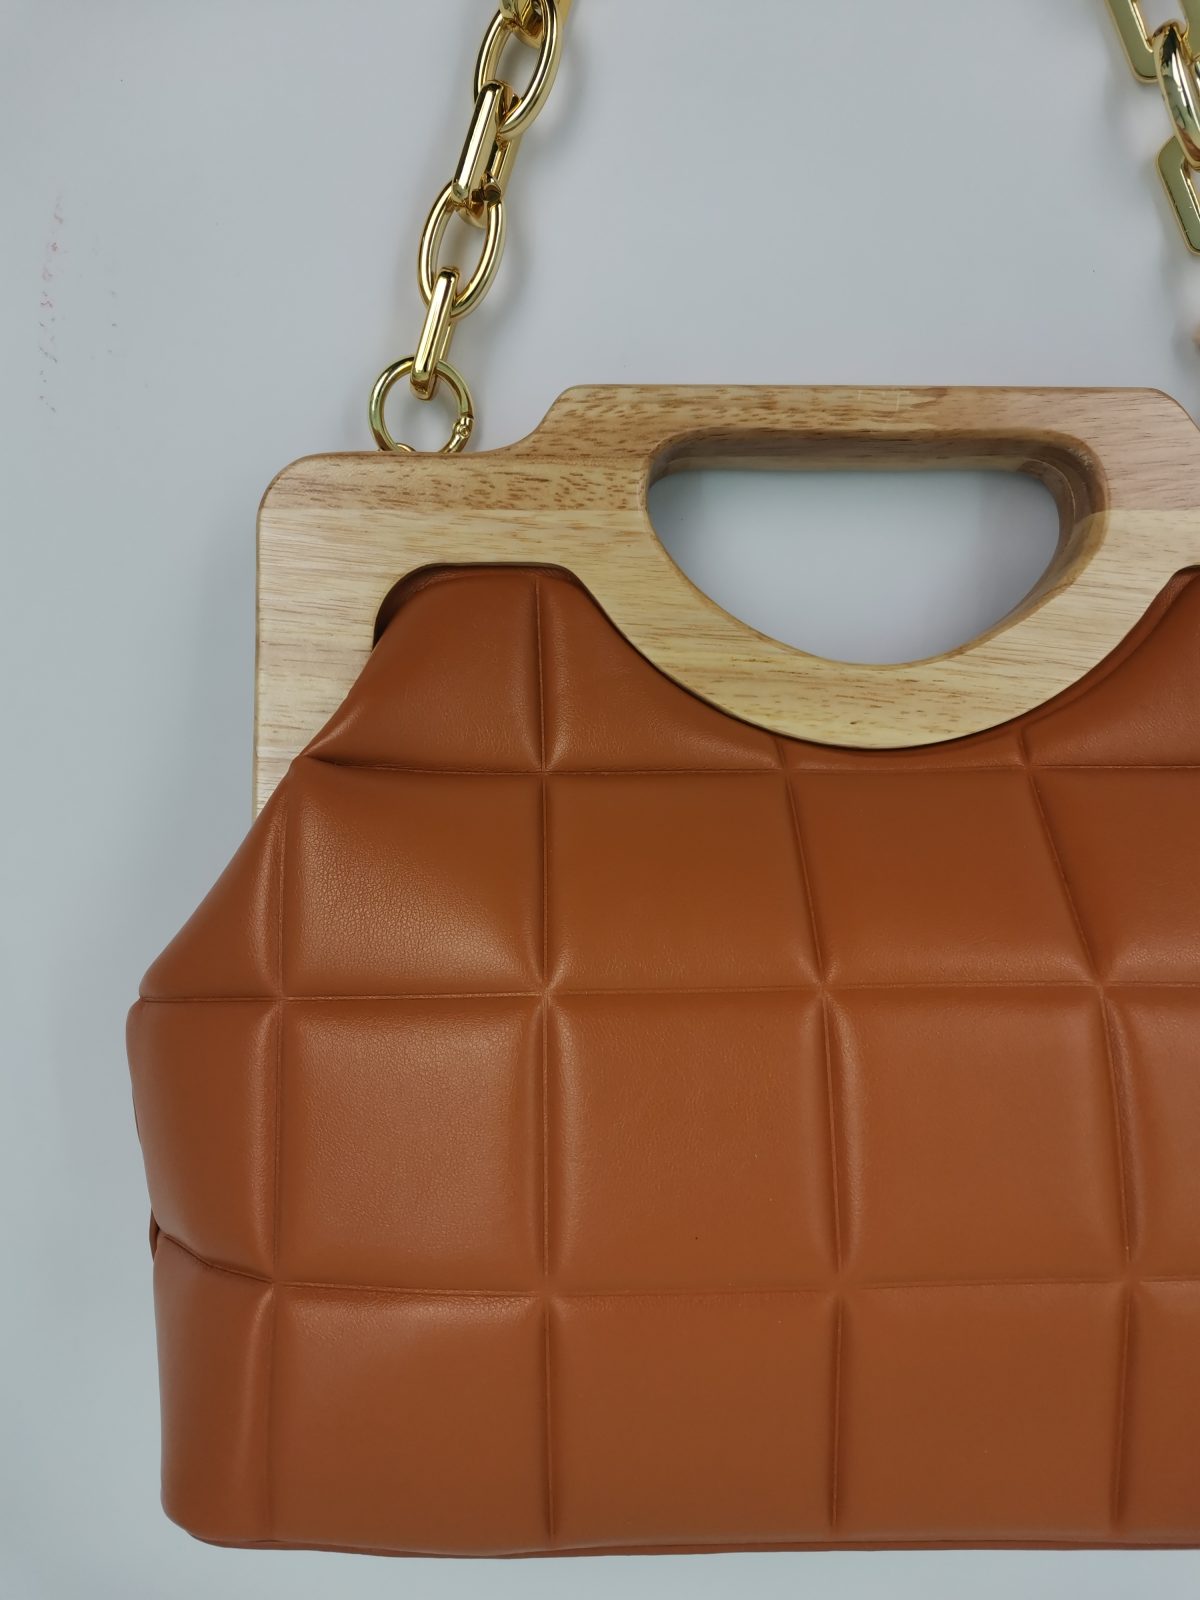 Brown bag with wooden handle and gold chain